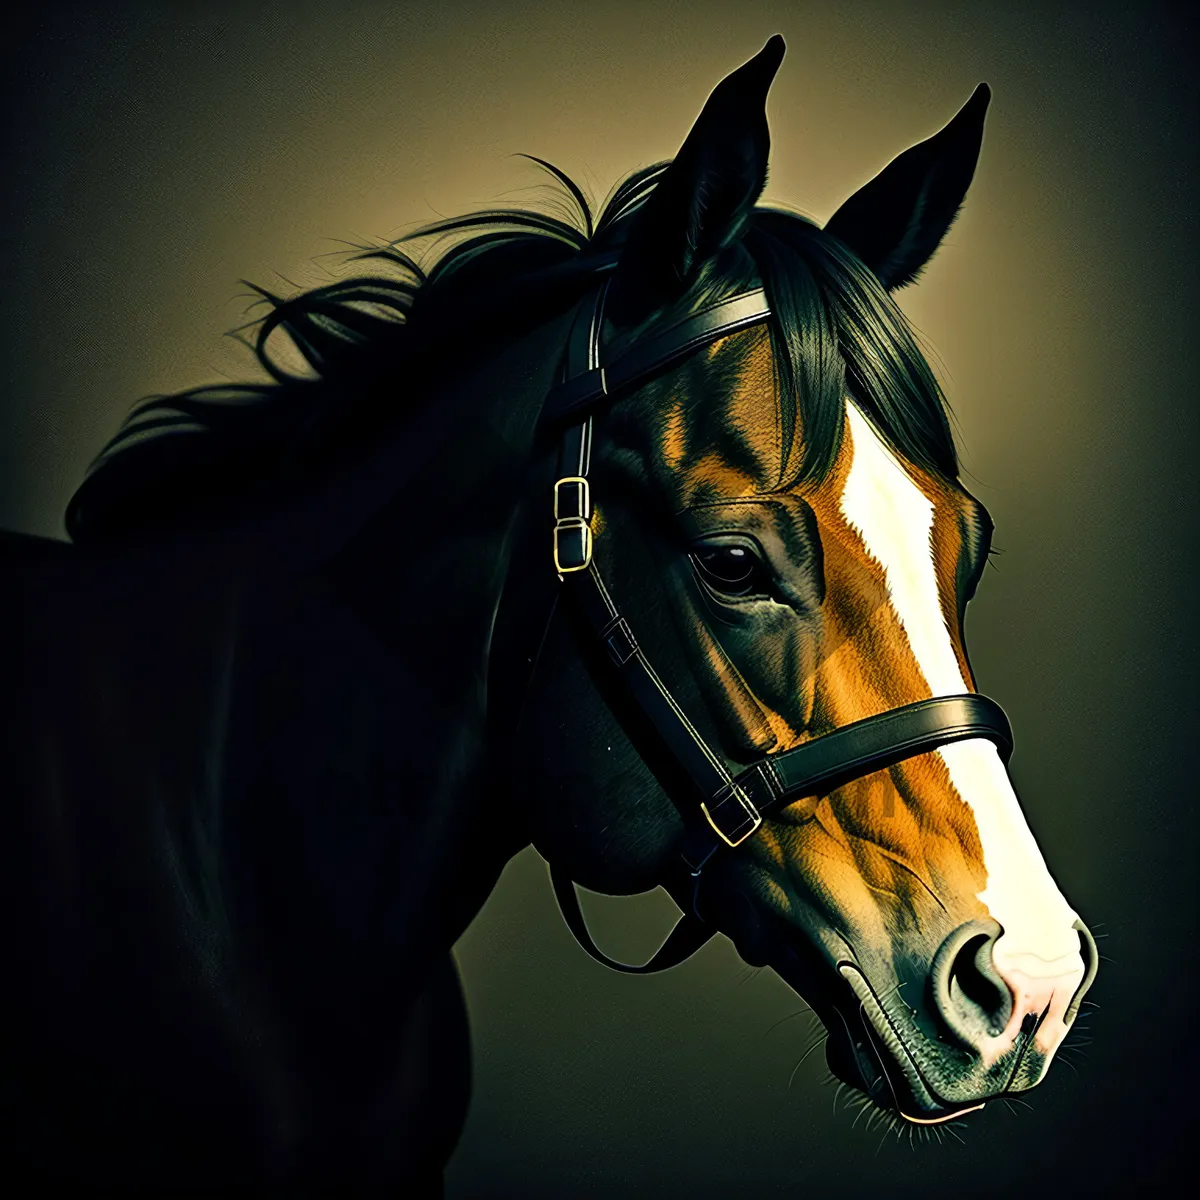 Picture of Majestic Thoroughbred Stallion in Equestrian Headgear.